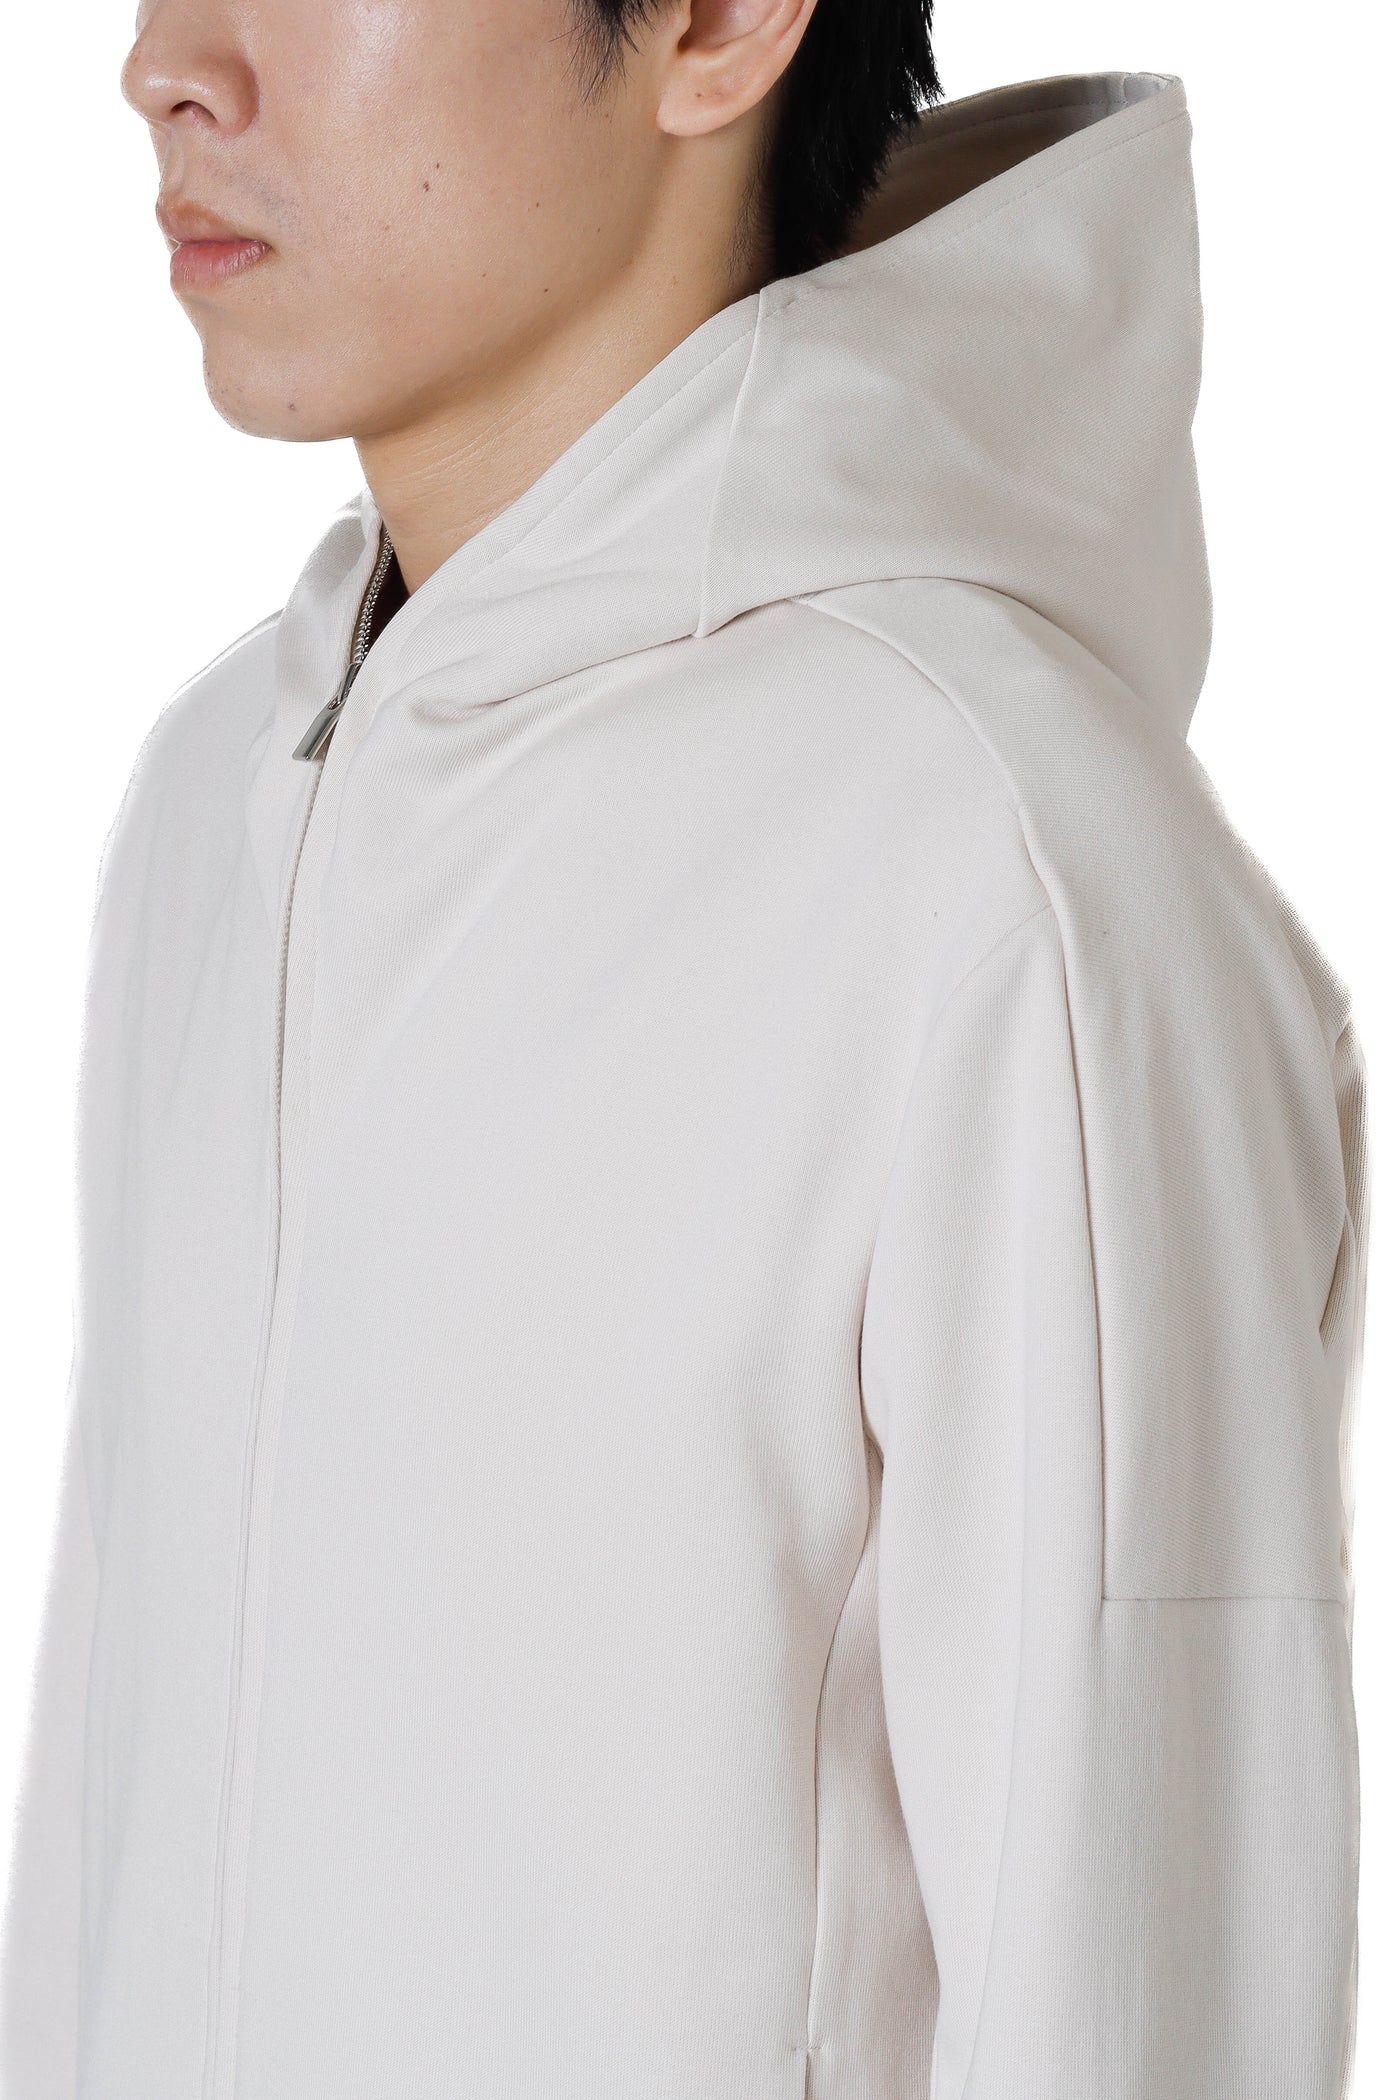 Limited product AJ32-036 Cotton/polyester cardboard knit zip-up hoodie